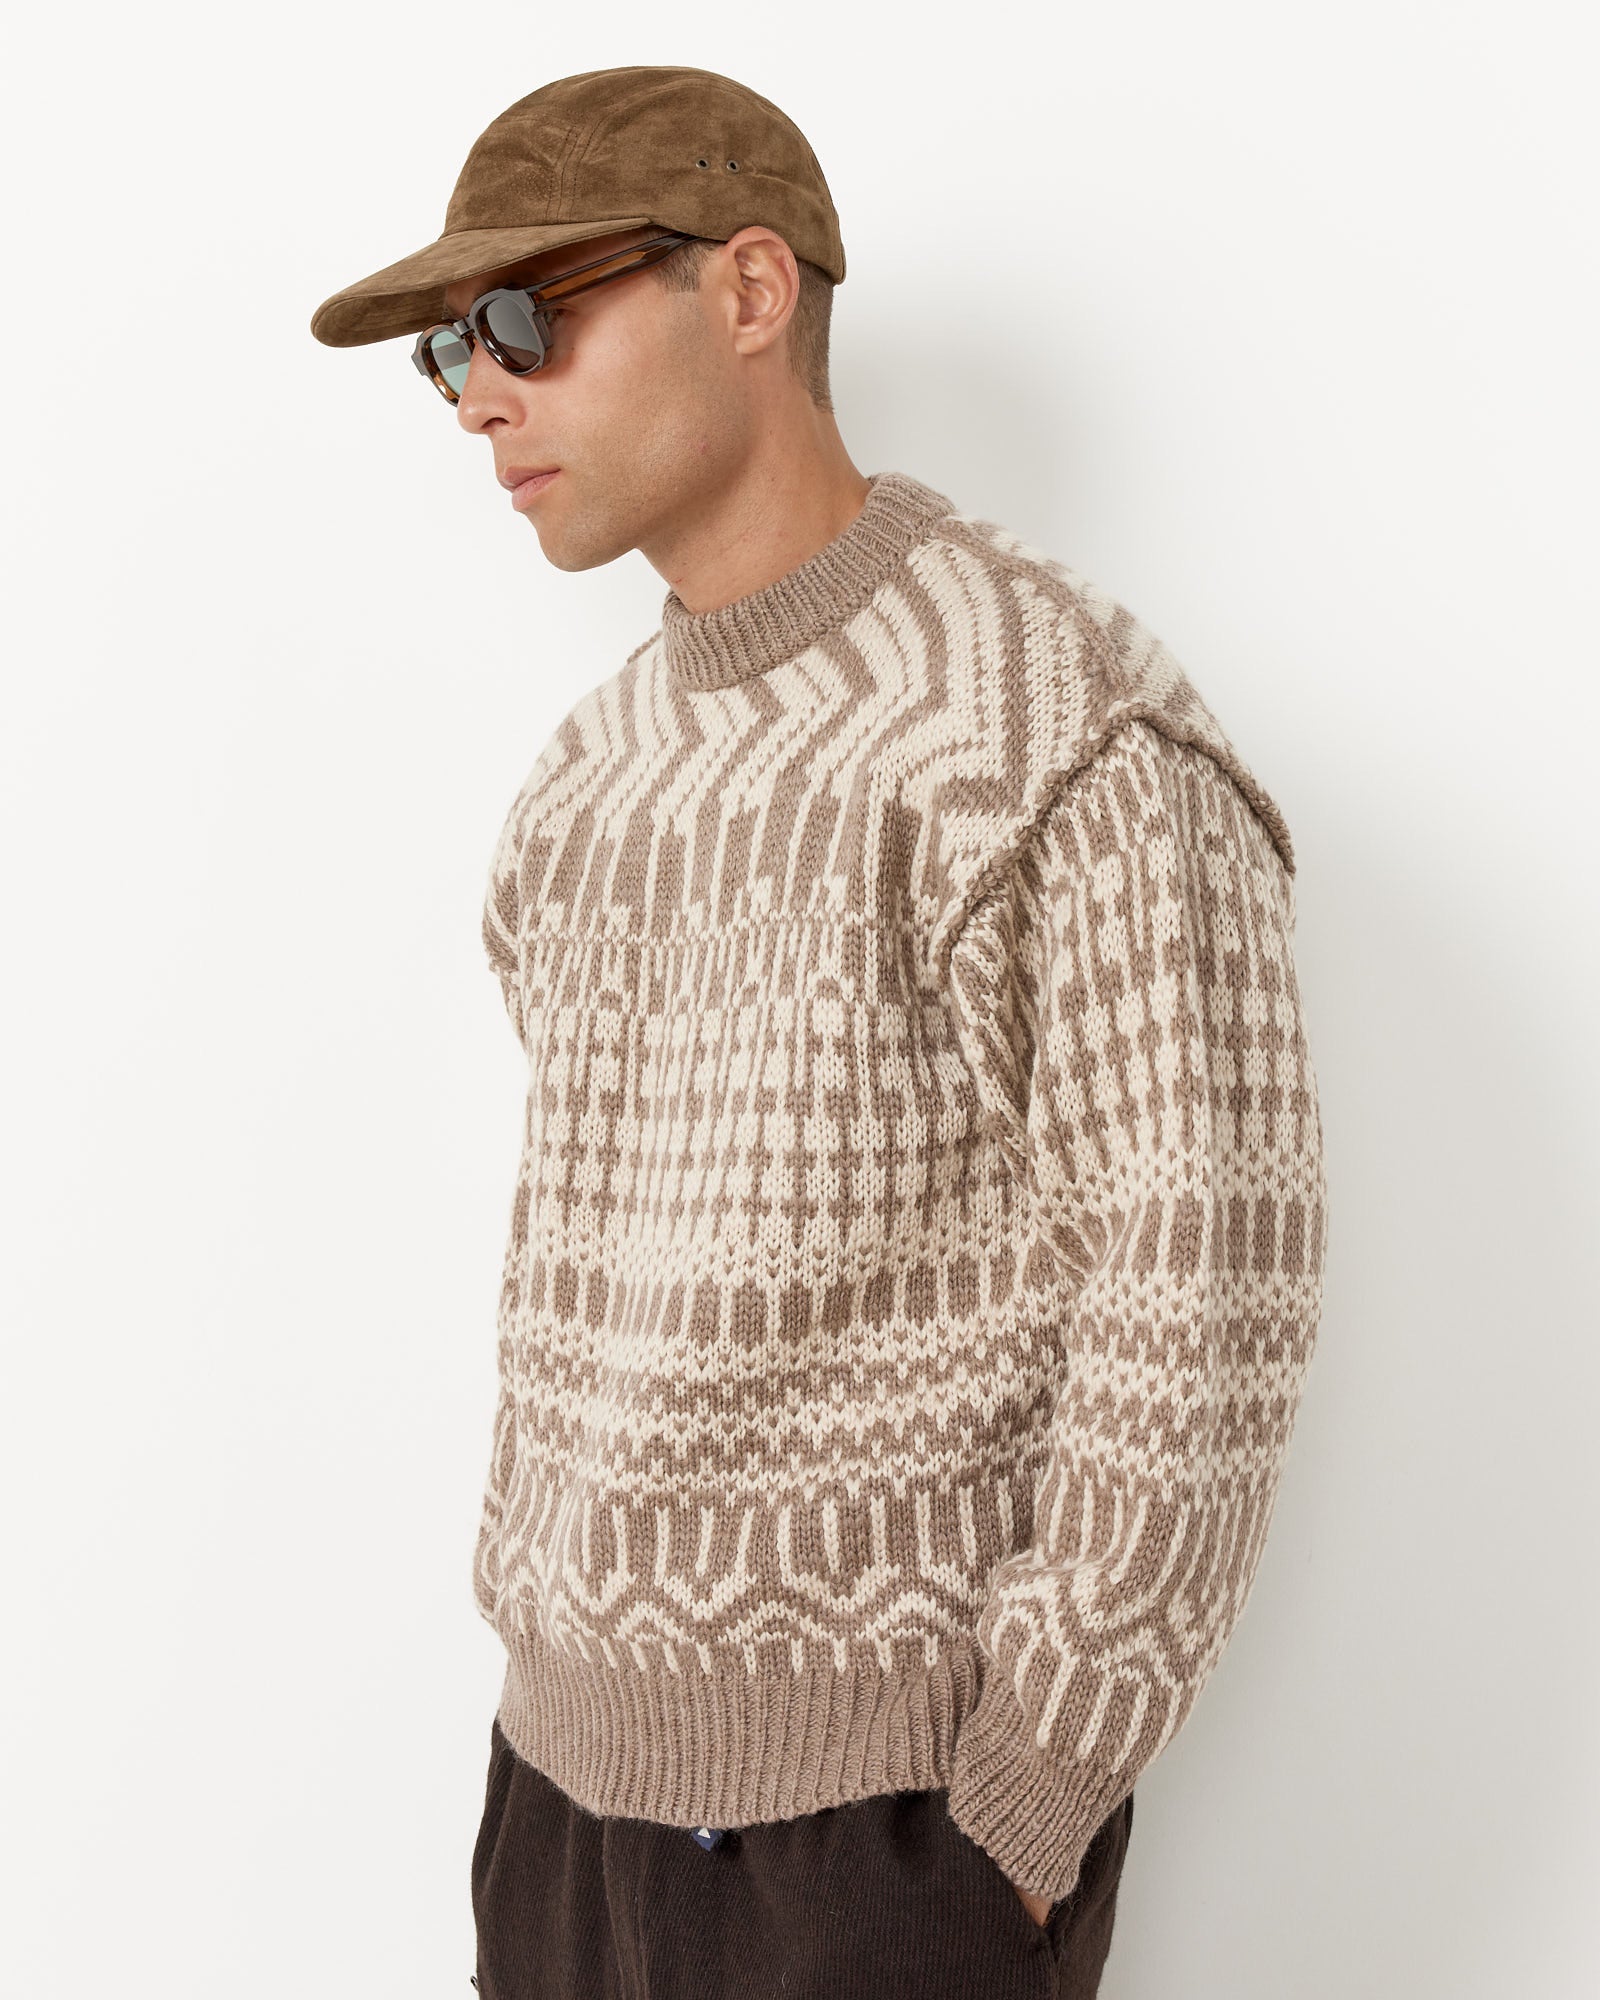 Atmosphere Lace Mohair Pullover Sweater Pattern Knitting Pattern - Free  with yarn purchase